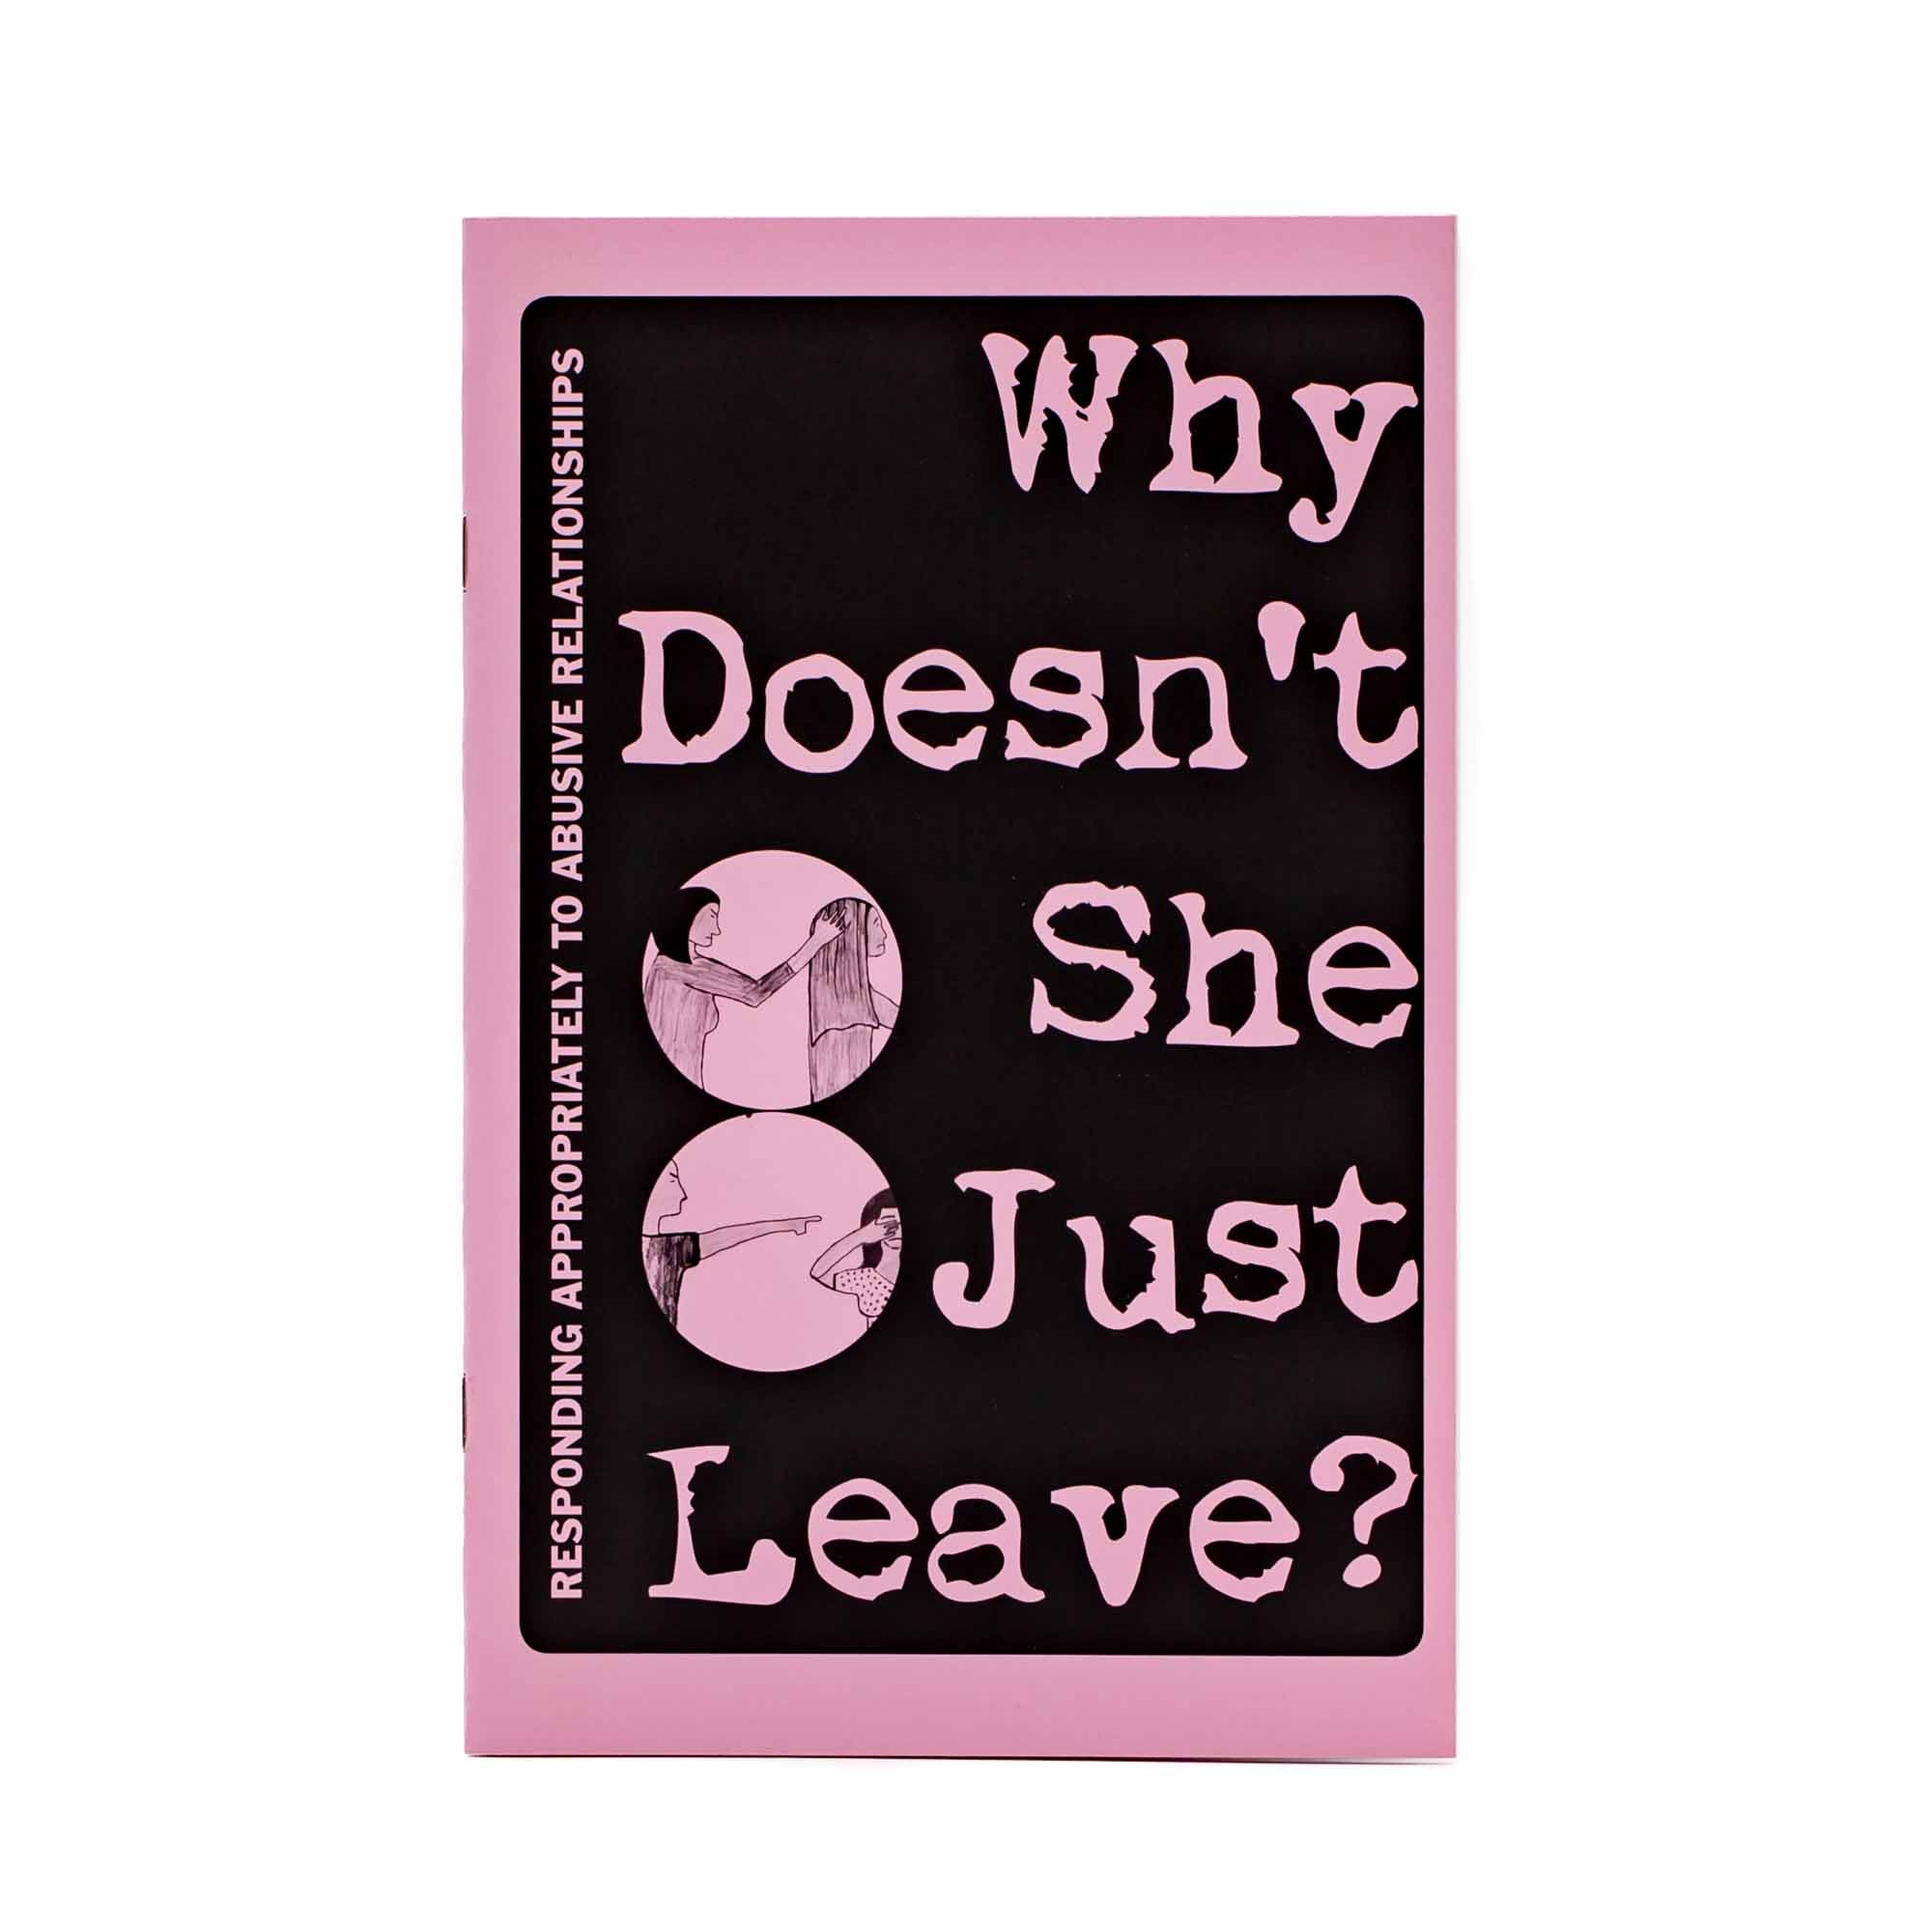 Why Doesn't She Just Leave? Responding Appropriately to Abusive Relationships - Mortise And Tenon